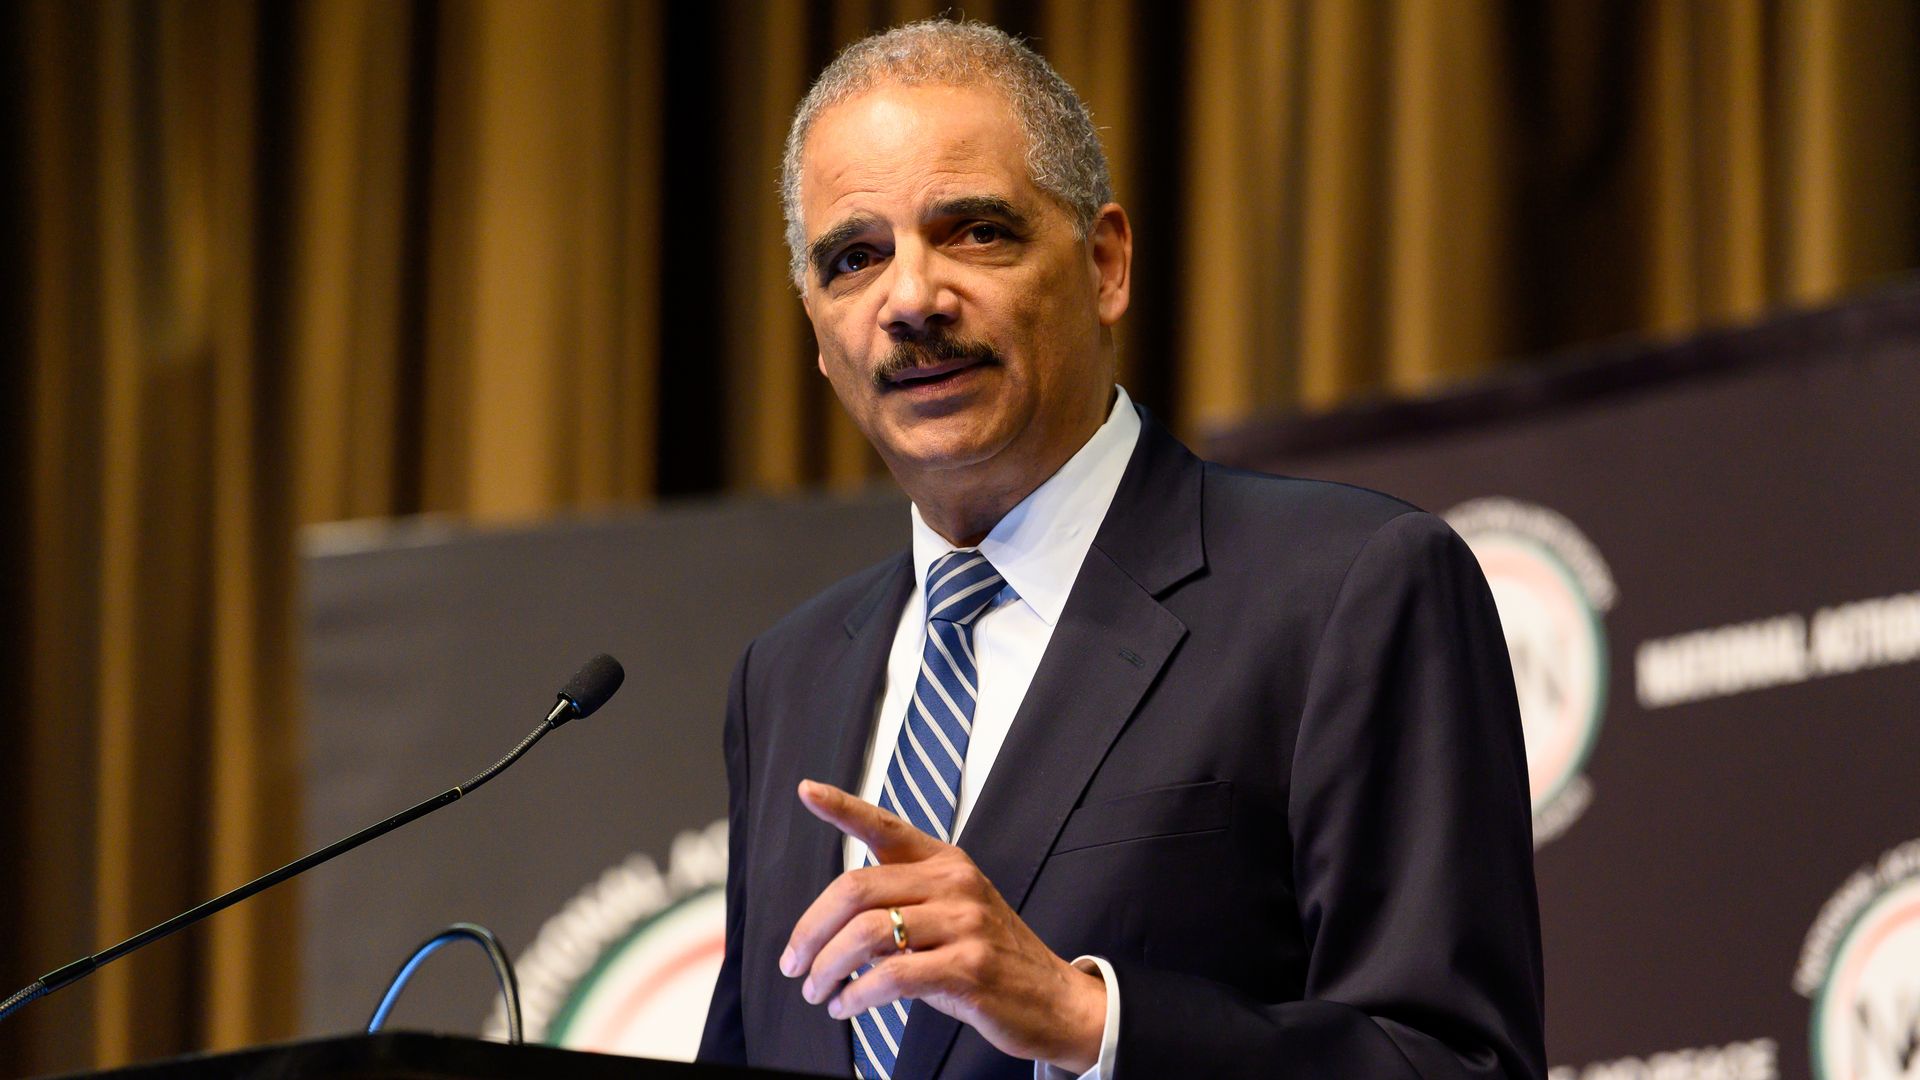 Eric Holder, former U.S. Attorney General, at the National Action Network (NAN) convention in New York City.